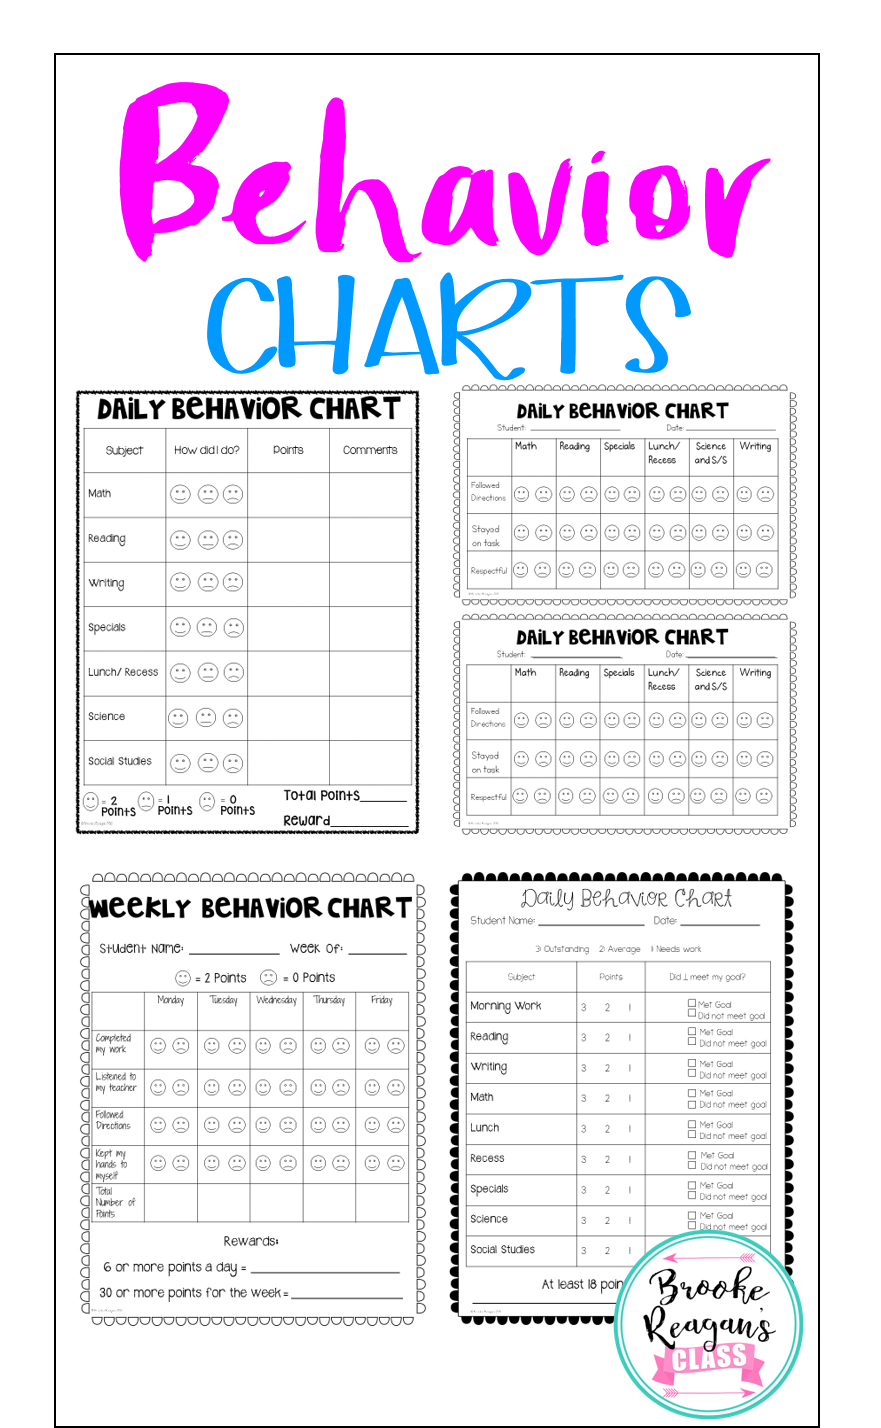 These Behavior Charts Are Great To Use With Your Students That Need A